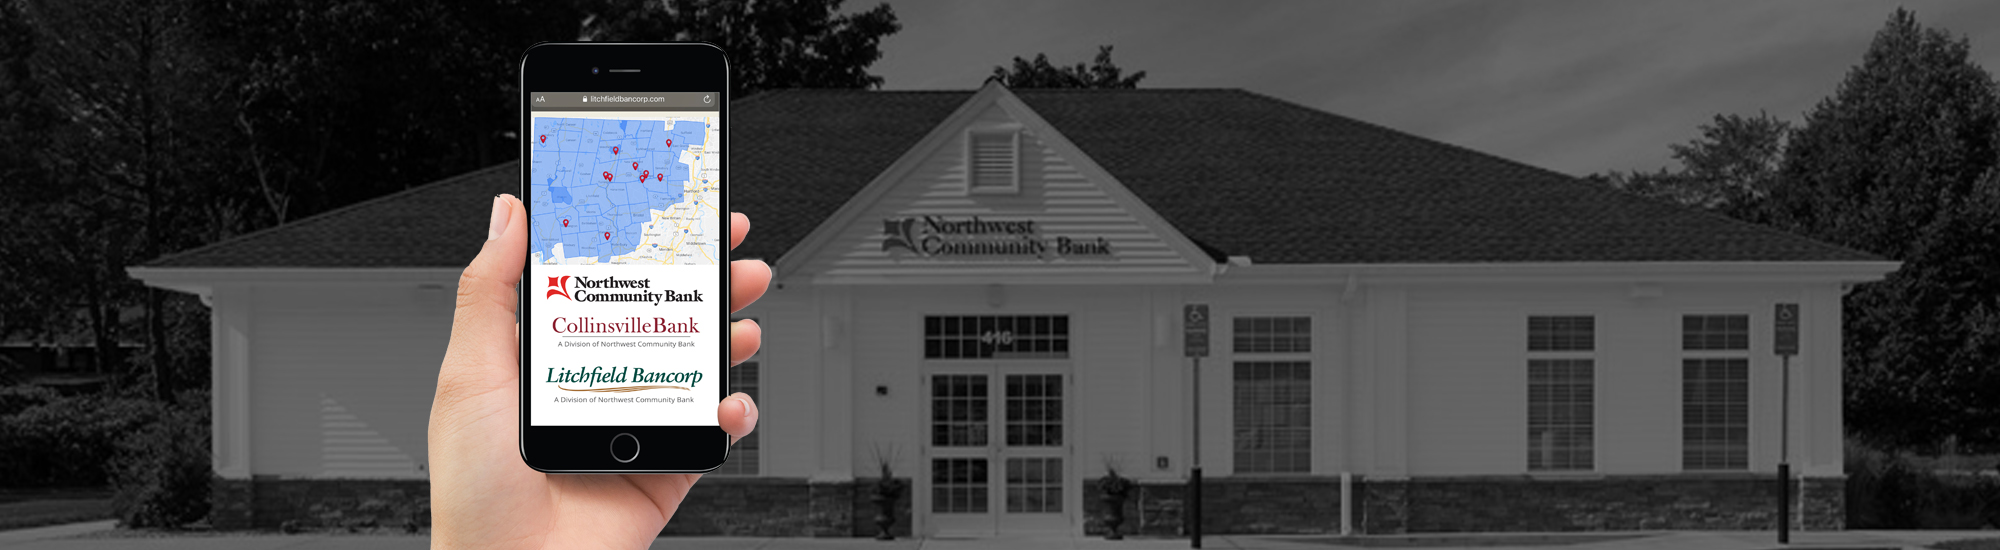 Hand holding an iPhone with Northwest Community Bank website loaded while standing in front of bank